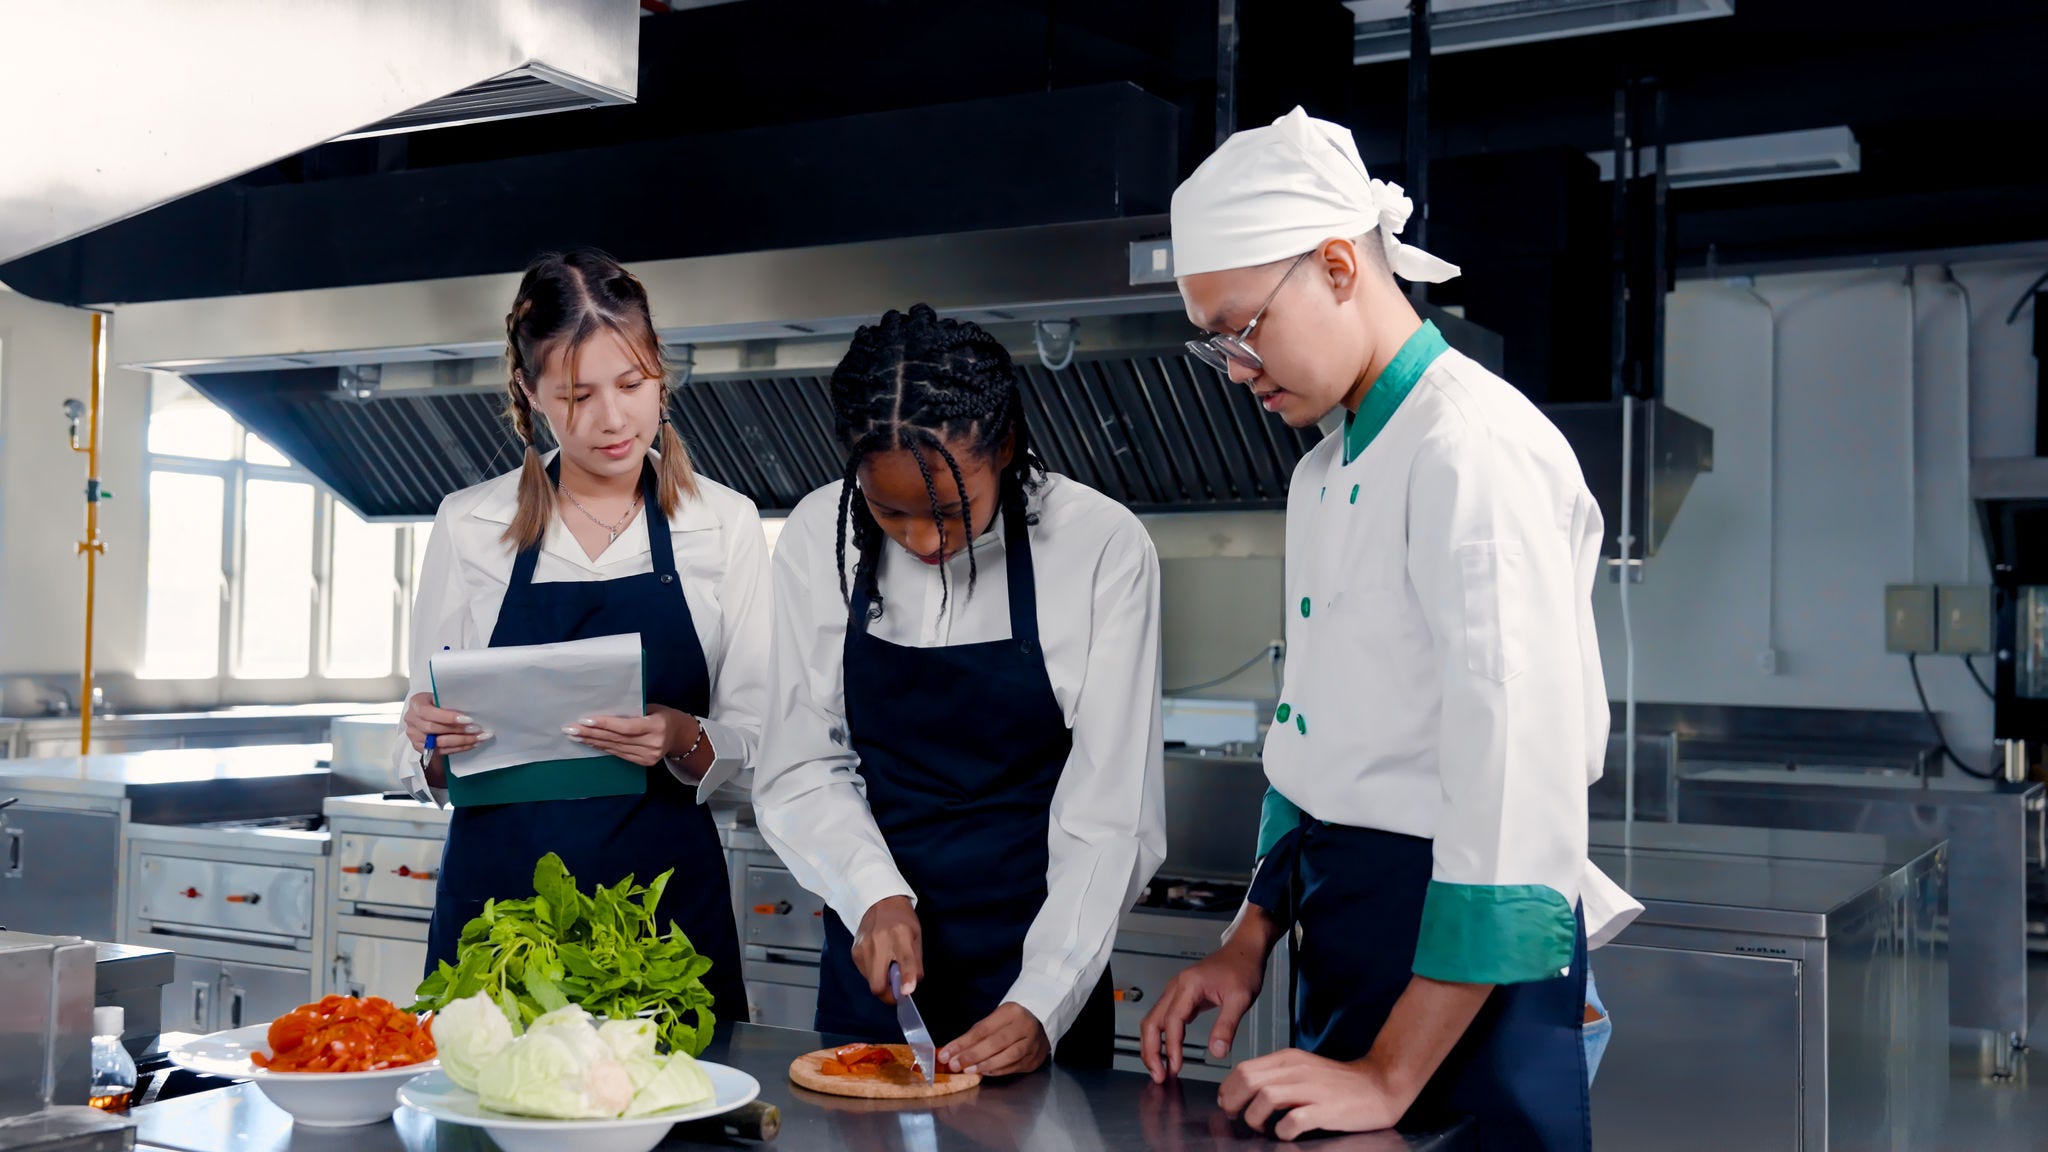 Two young chefs receiving training from other chef in a commercial kitchen